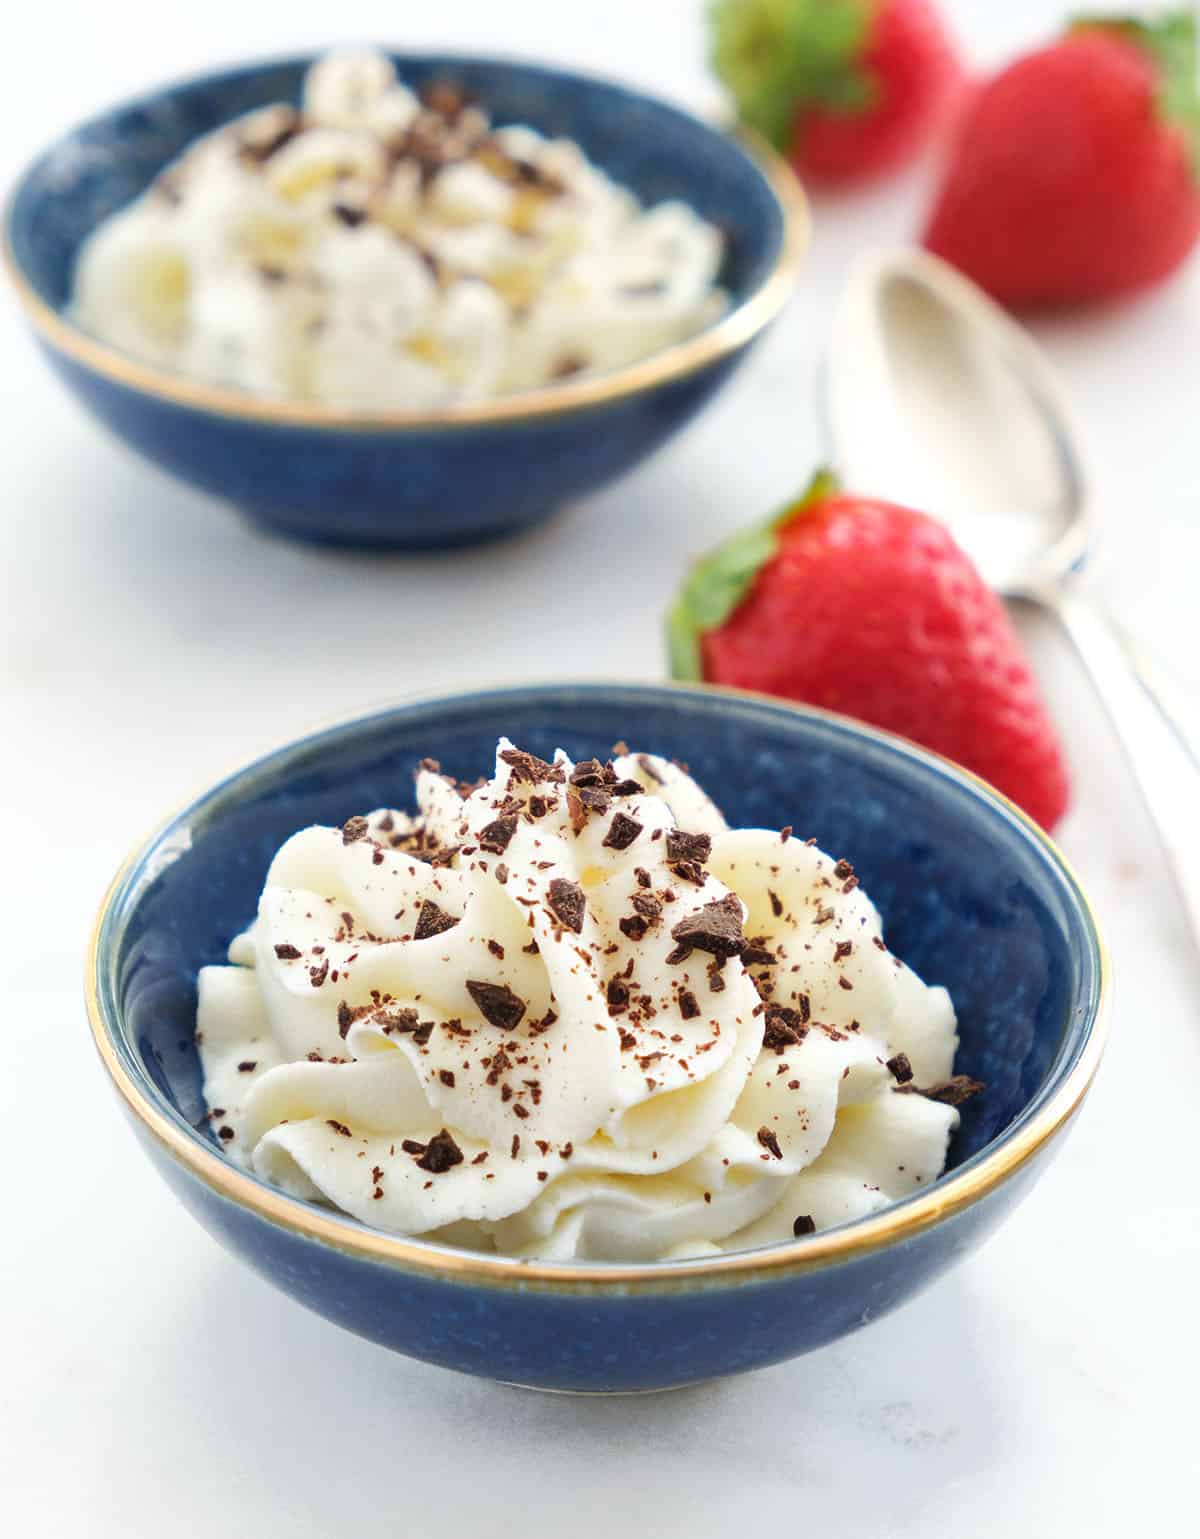 Two small blue bowl full of ricotta cream garnished with chocolate bits and served with strawberries.